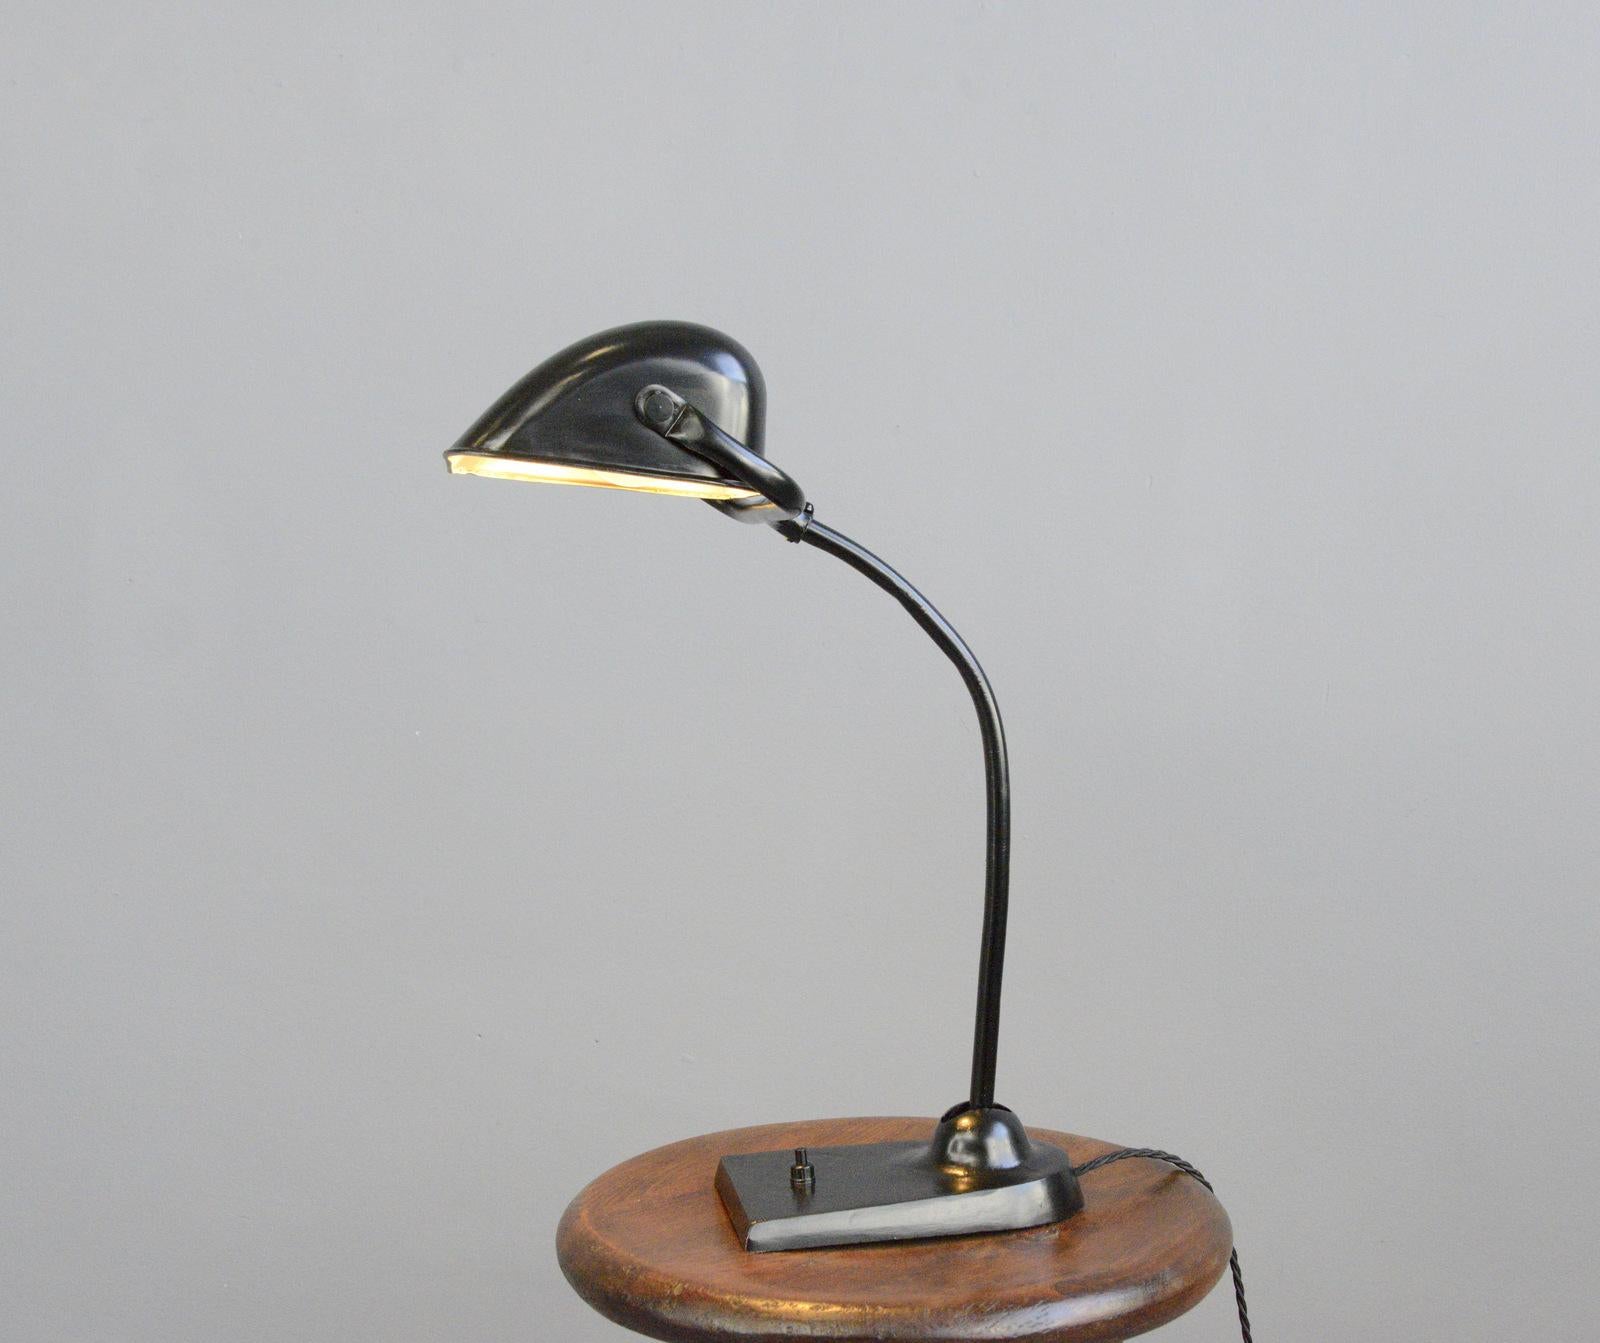 Kaiser Idell model 6617 table lamp, circa 1930s

- Cast iron base
- Adjustable arm and shade
- Takes E27 fitting bulbs
- Designed by Christian Dell
- Model 6617
- Produced by Kaiser Idell, Neheim
- German, 1930s
- Size: 46cm tall x 36cm